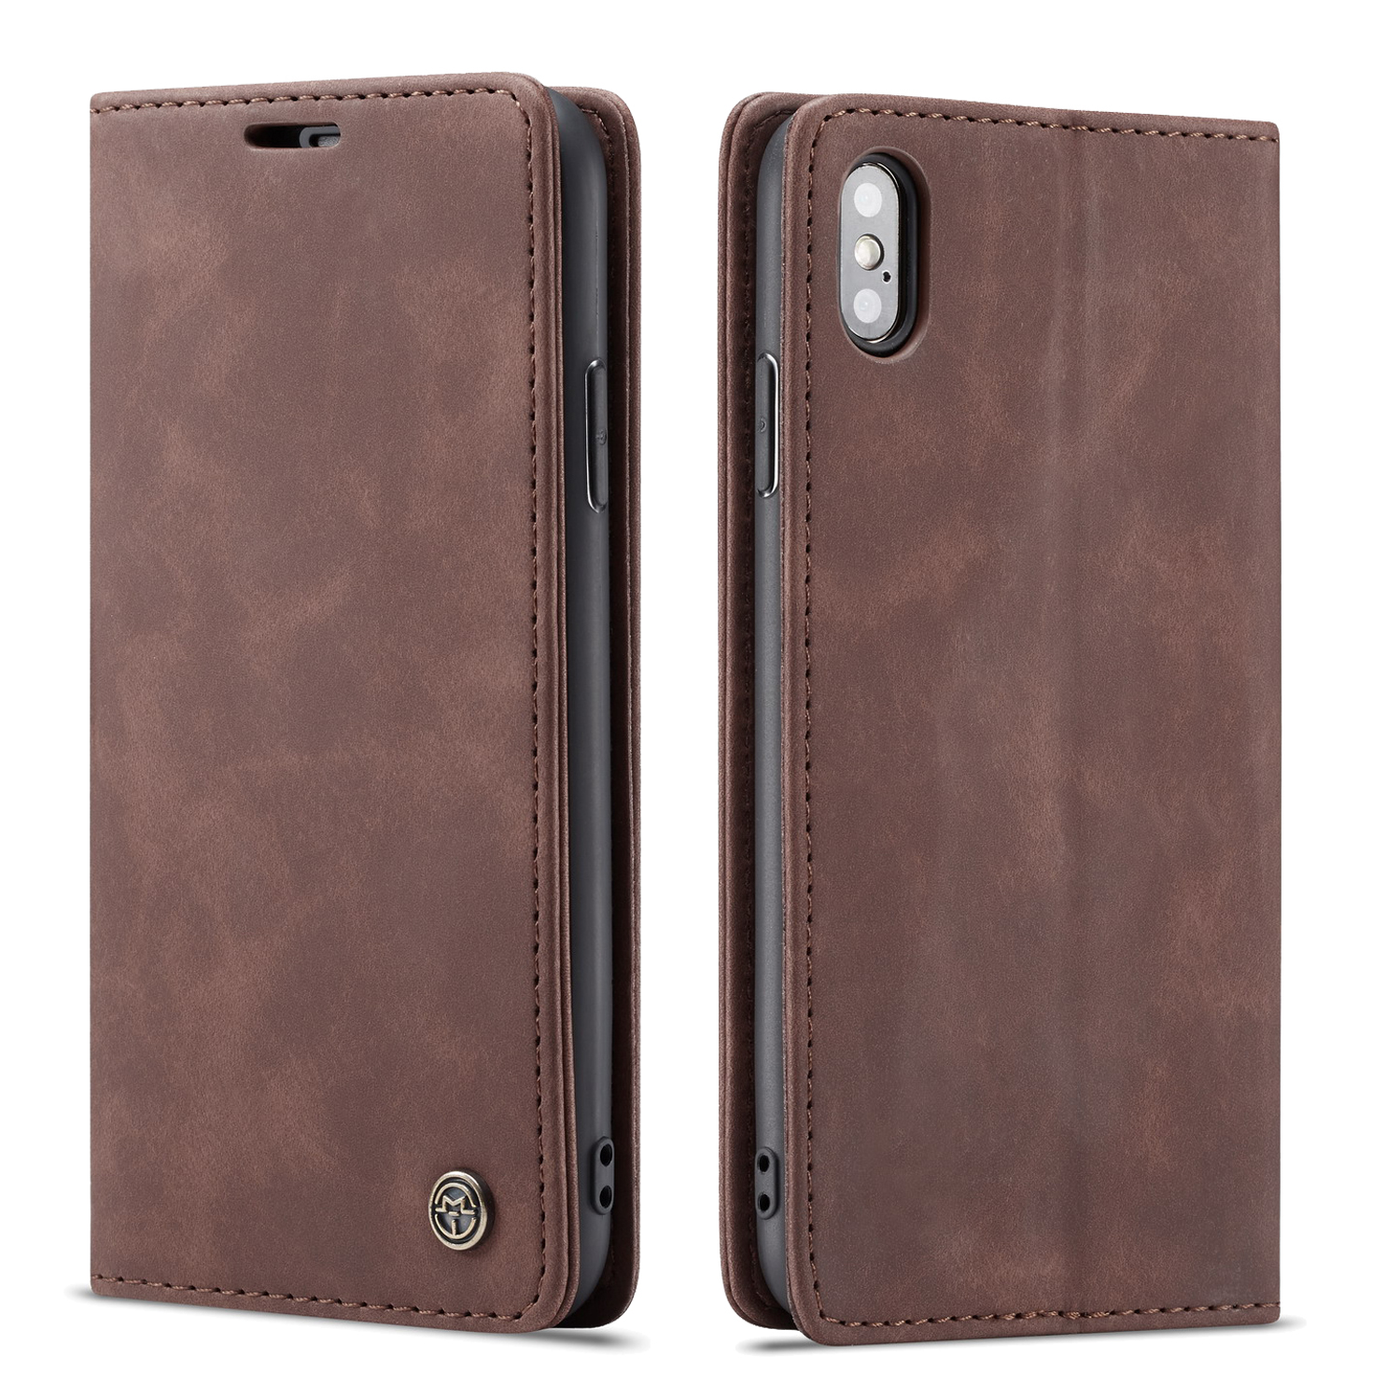 Apple iPhone XS Max 360 degree protection leather wallet flip cover by excelsior